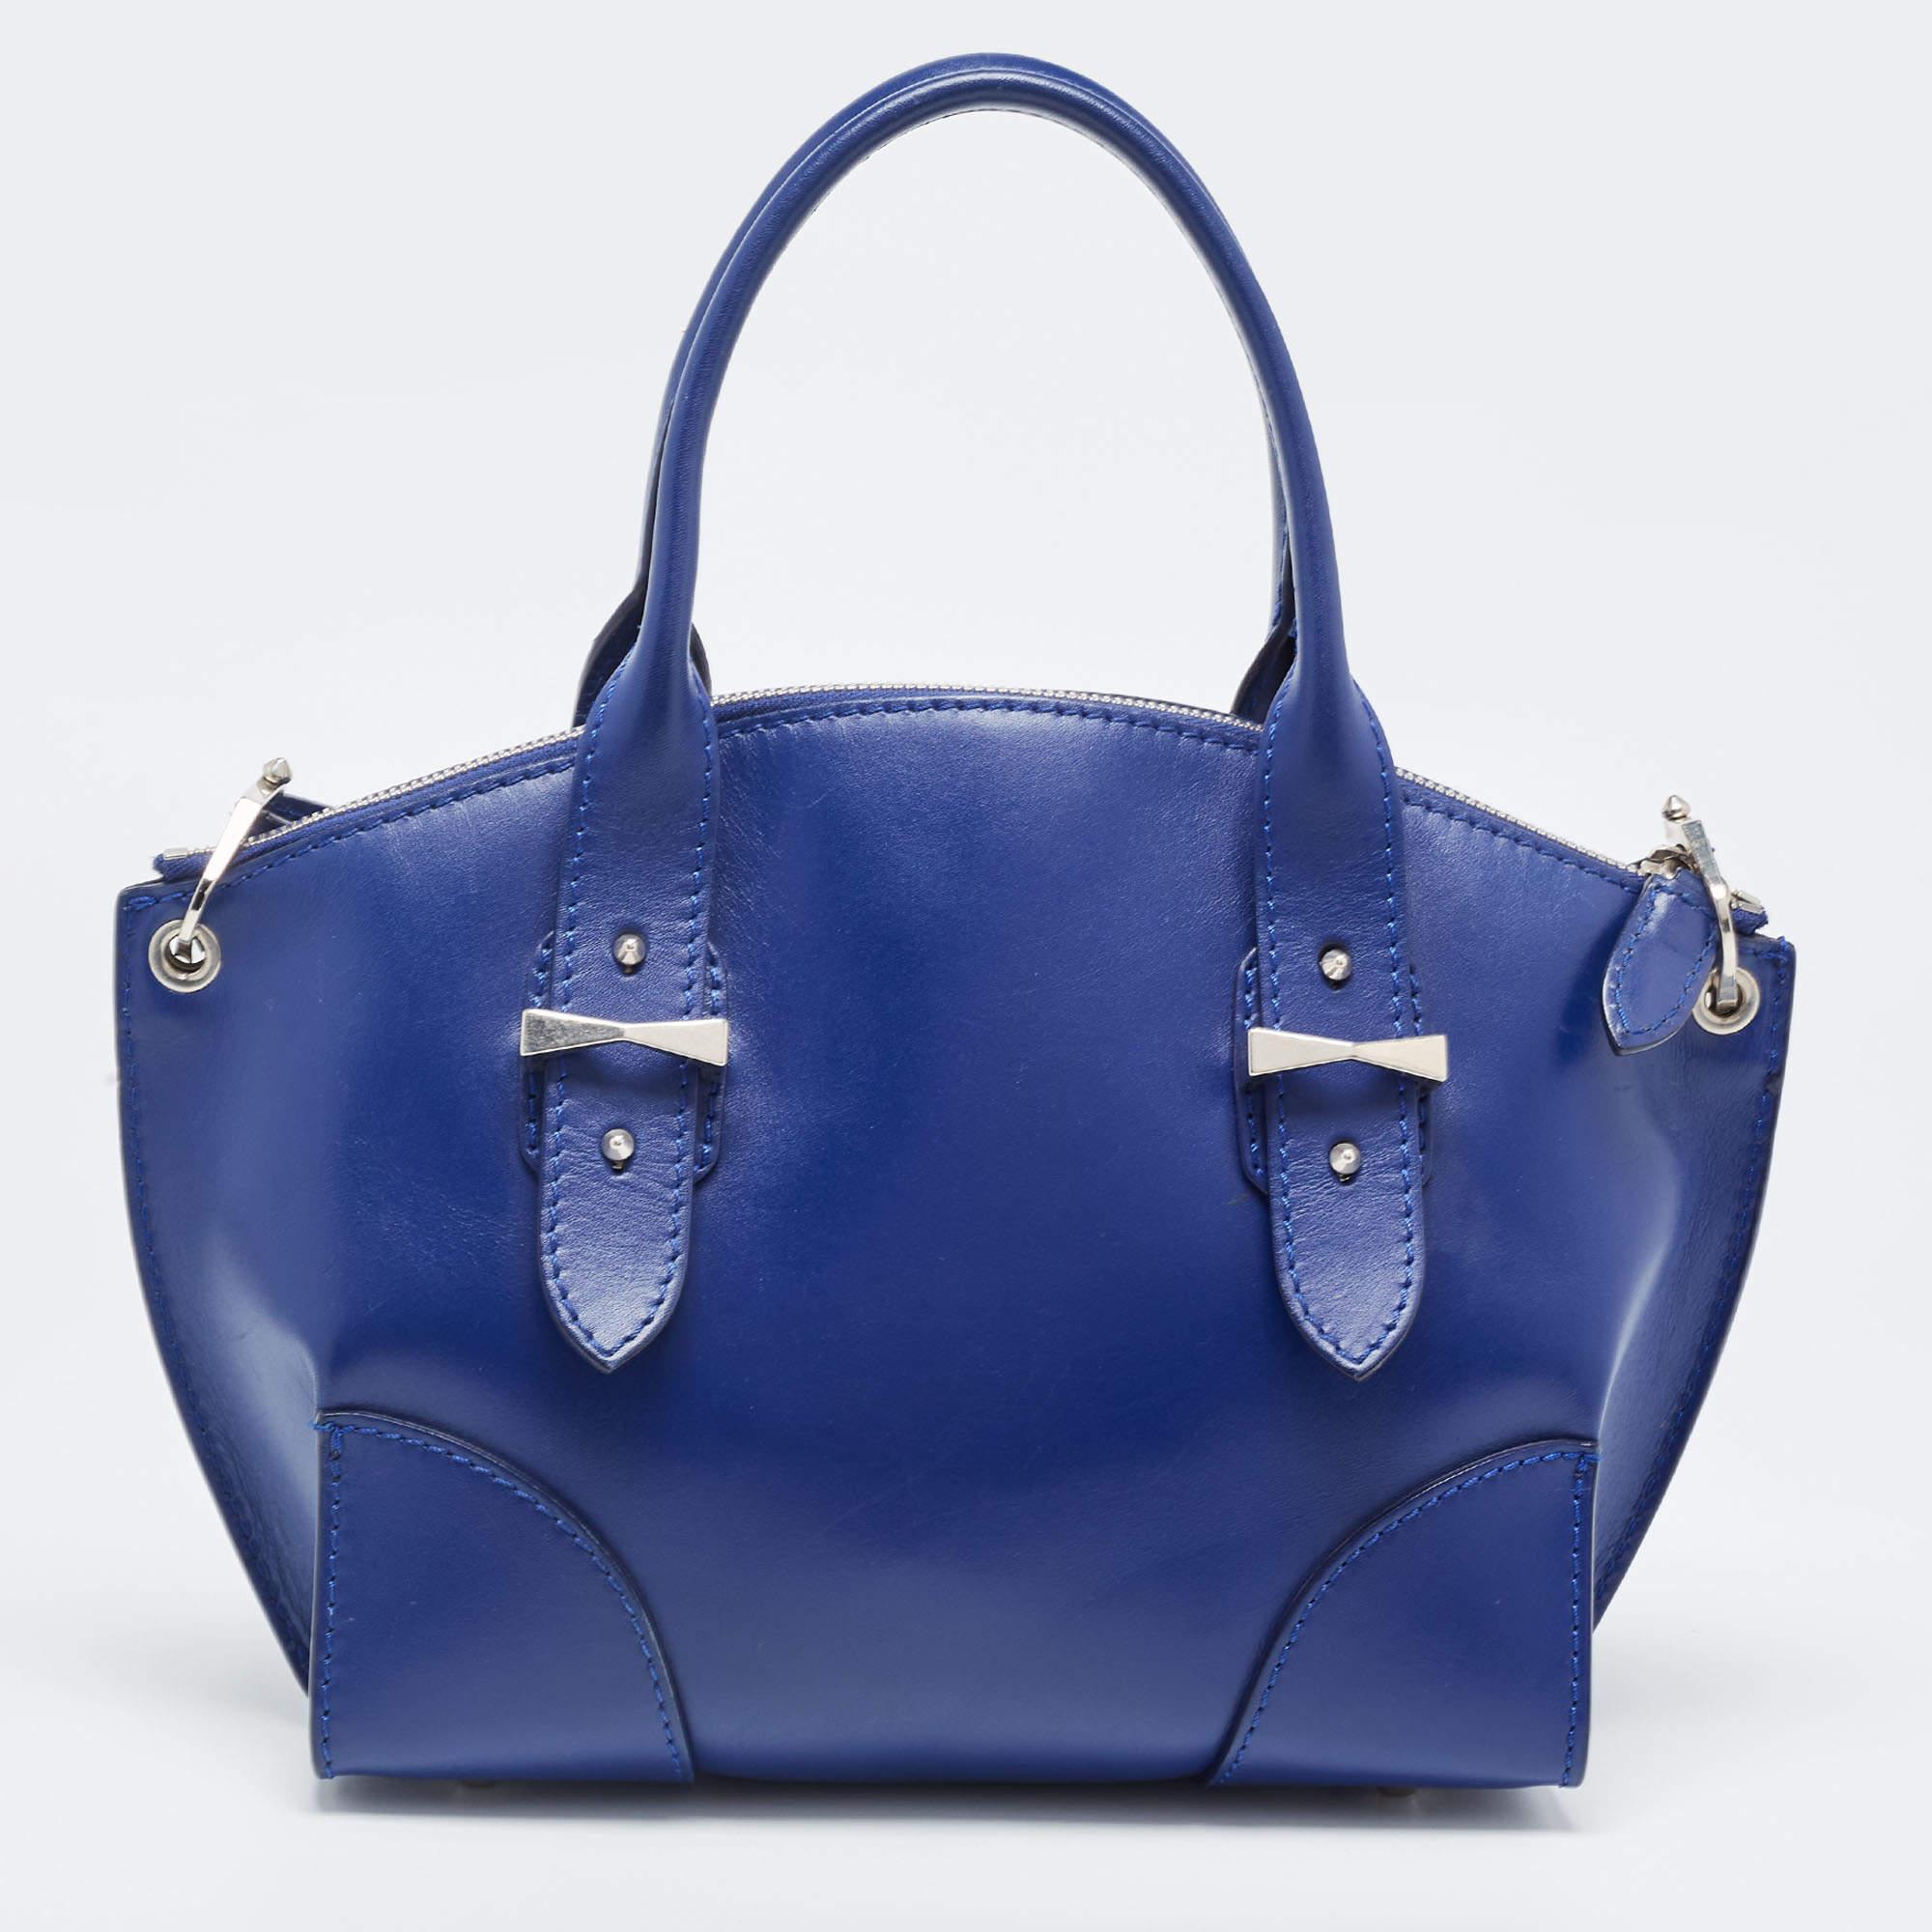 Add a dash of color to your outfit with this blue Legend tote from Alexander McQueen. Crafted from leather, it features a structured body, top round handles supported with silver-tone buckles, and a removable leather strap. The bag is secured with a